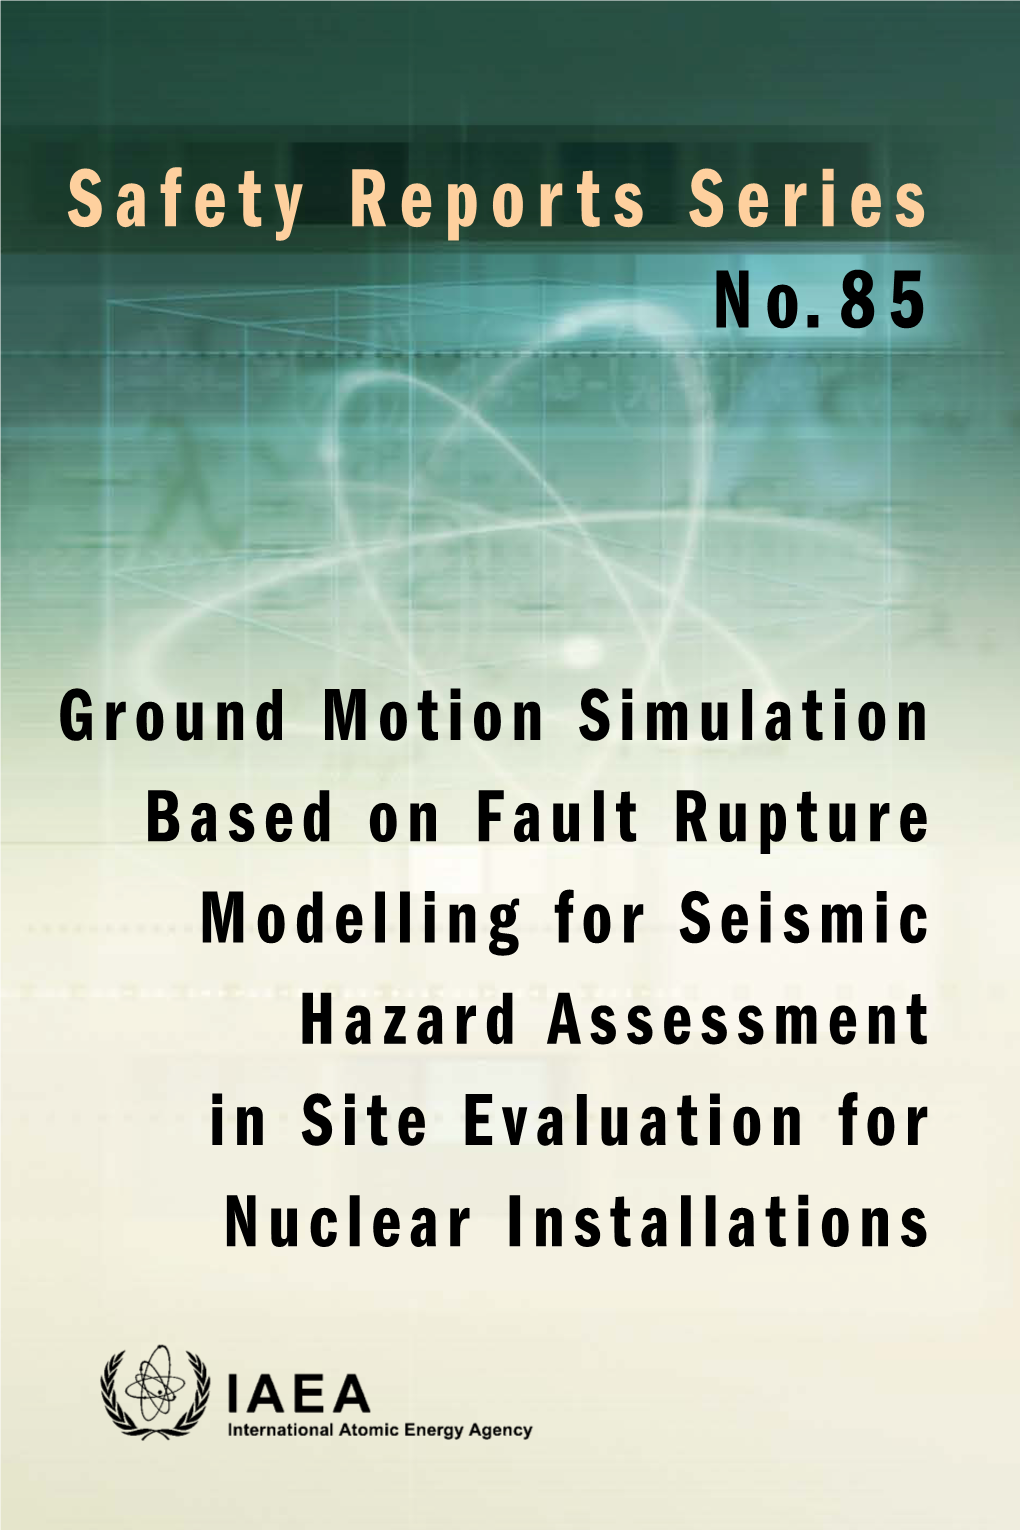 Ground Motion Simulation Based on Fault Rupture Modelling for Seismic